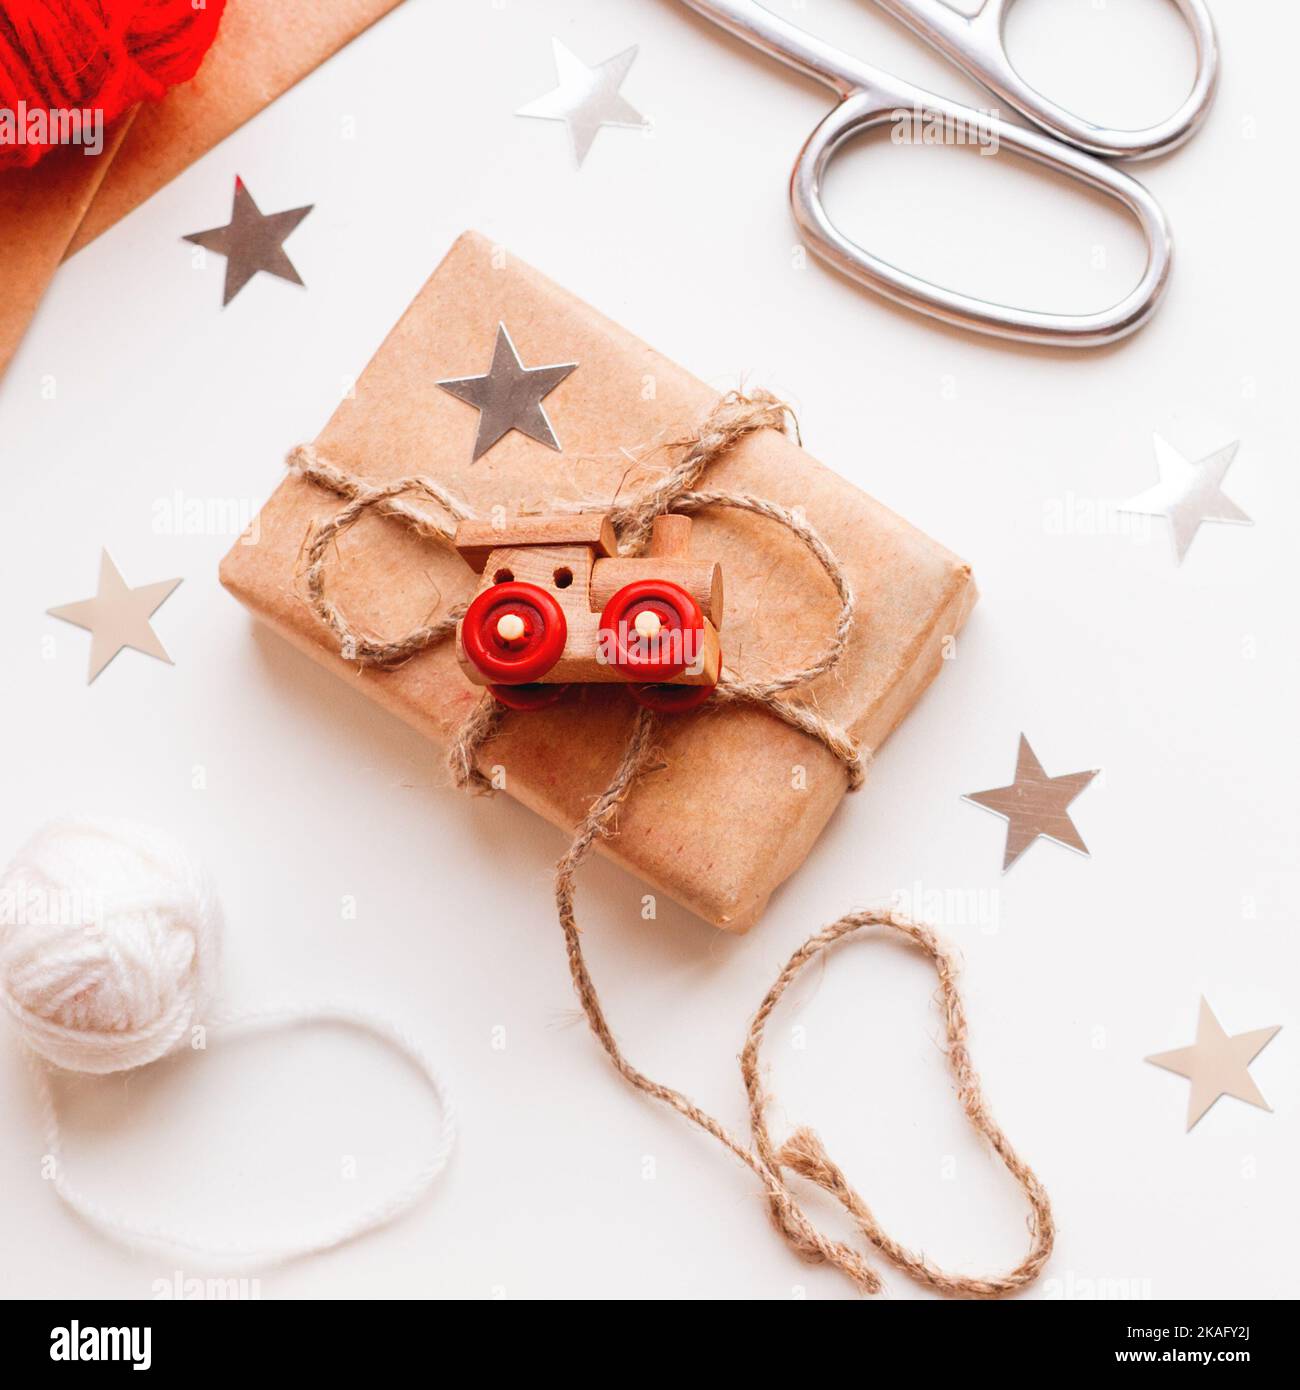 Christmas and New Year DIY presents in craft paper. Holiday gifts tied with white and red threads with toy train as decoration. Stock Photo